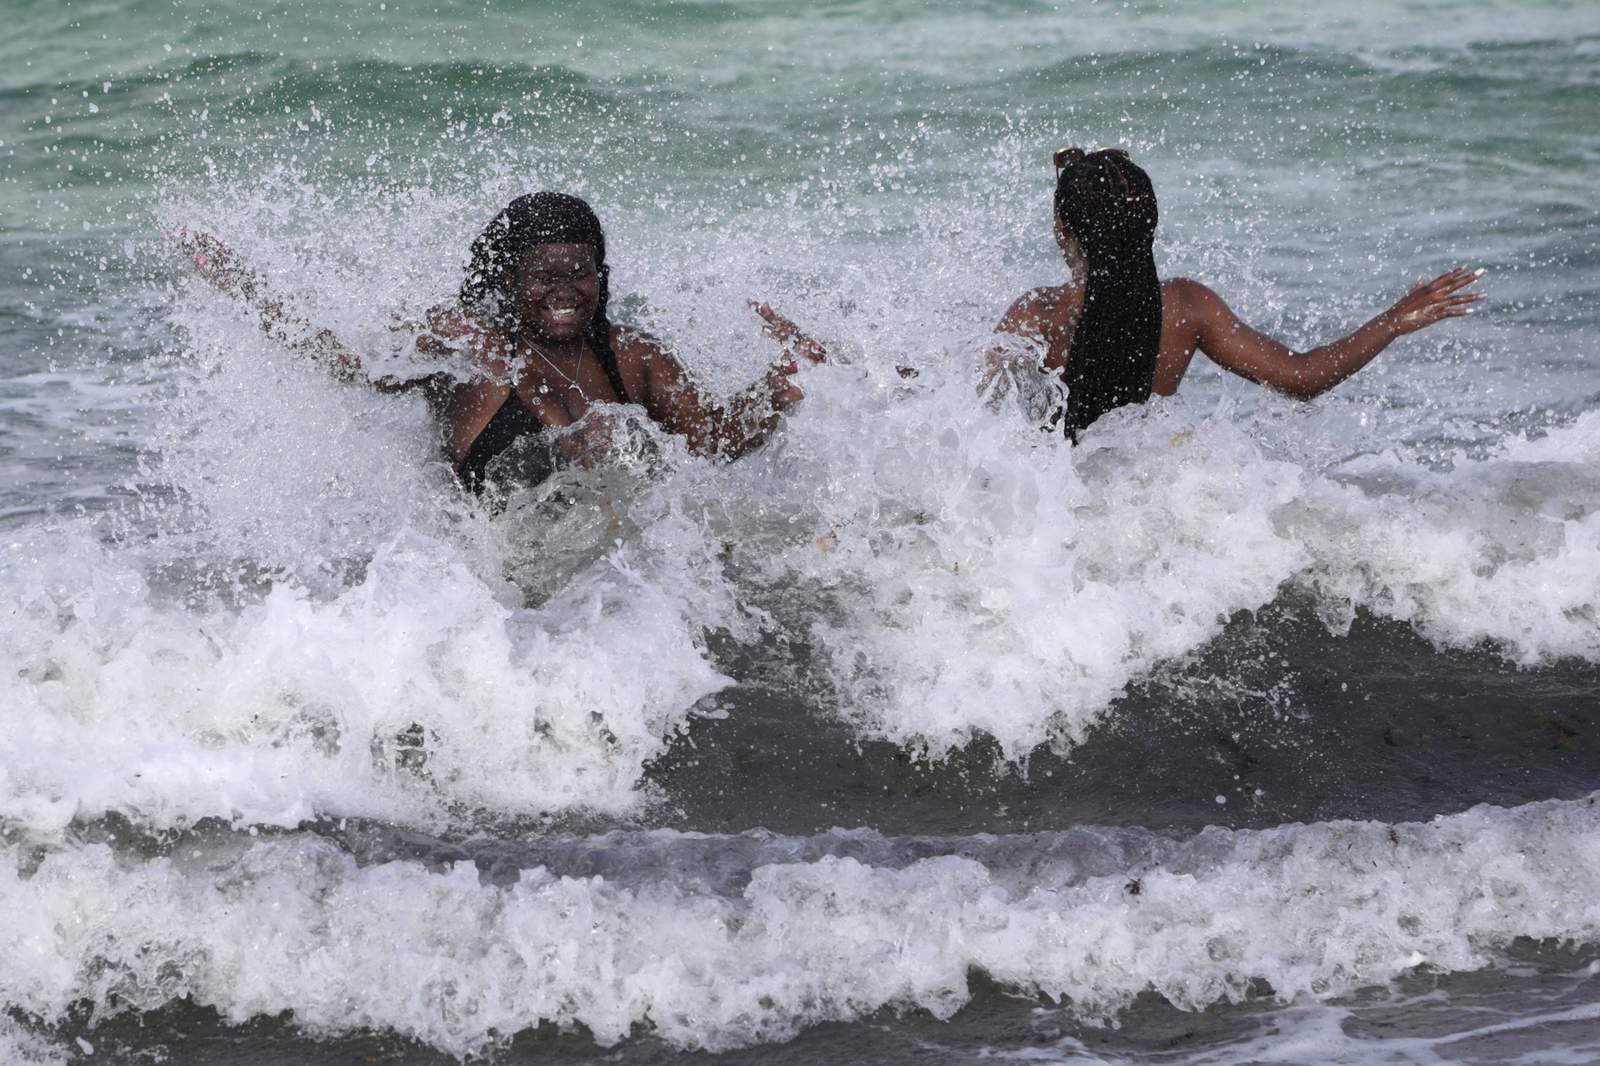 High heat and Hurricane Isaias: Here’s what to expect this weekend in Central Florida